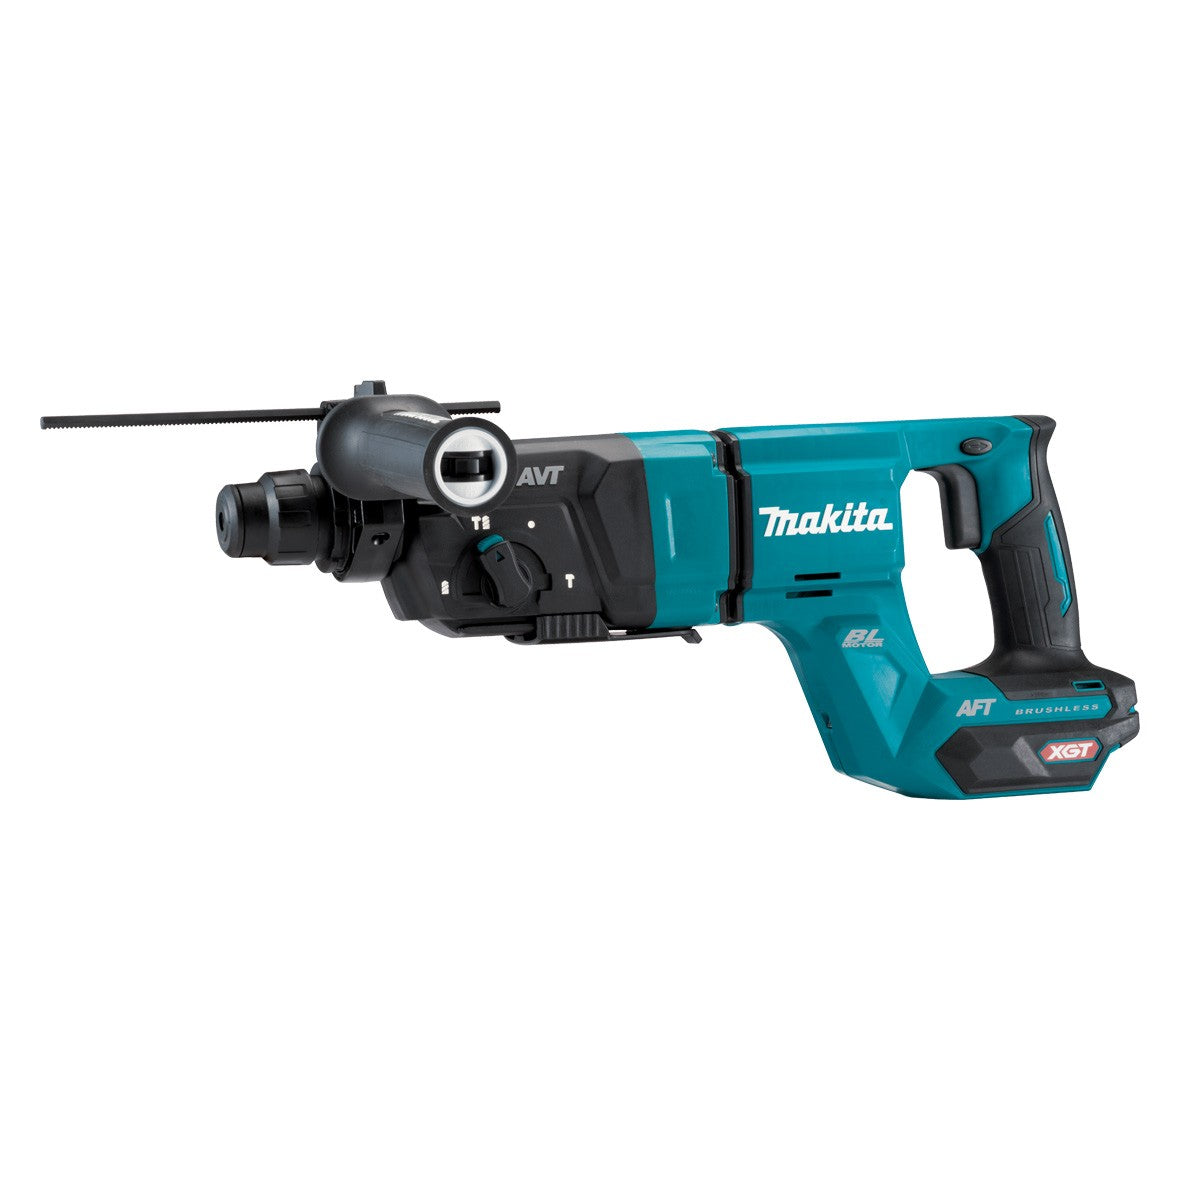 40V 28mm Brushless SDS Plus Rotary Hammer Bare (Tool Only) HR007GZ by Makita